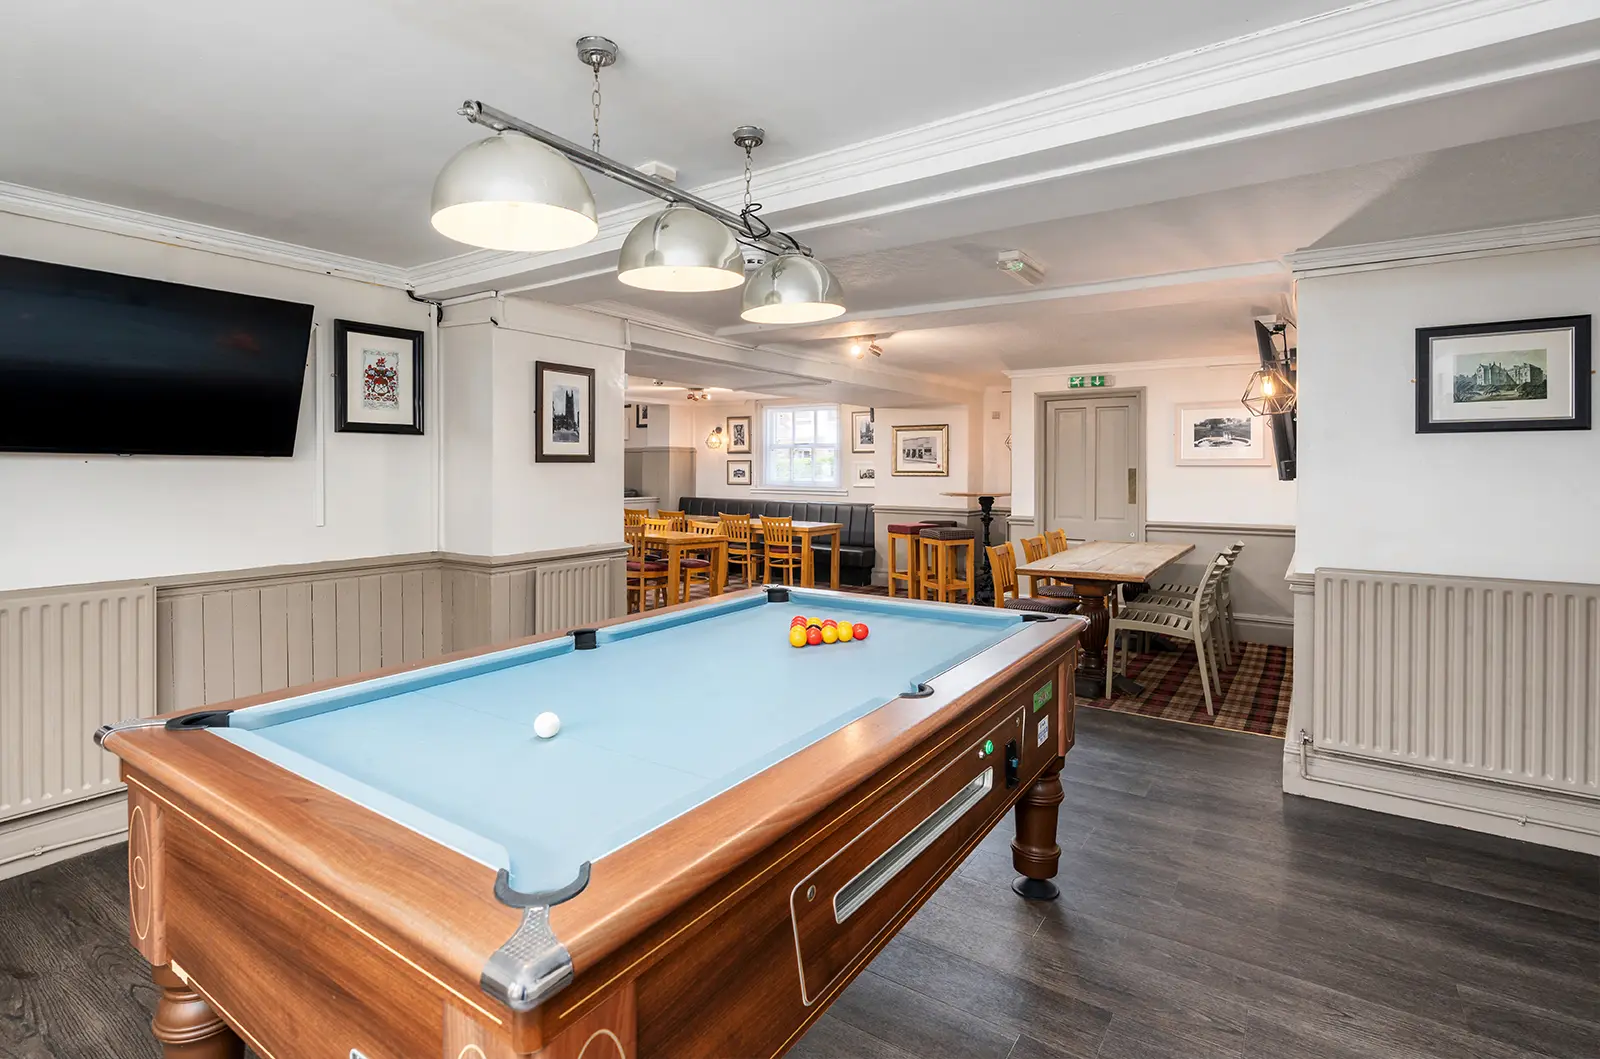 The Turf Pub Pool Table and Seating